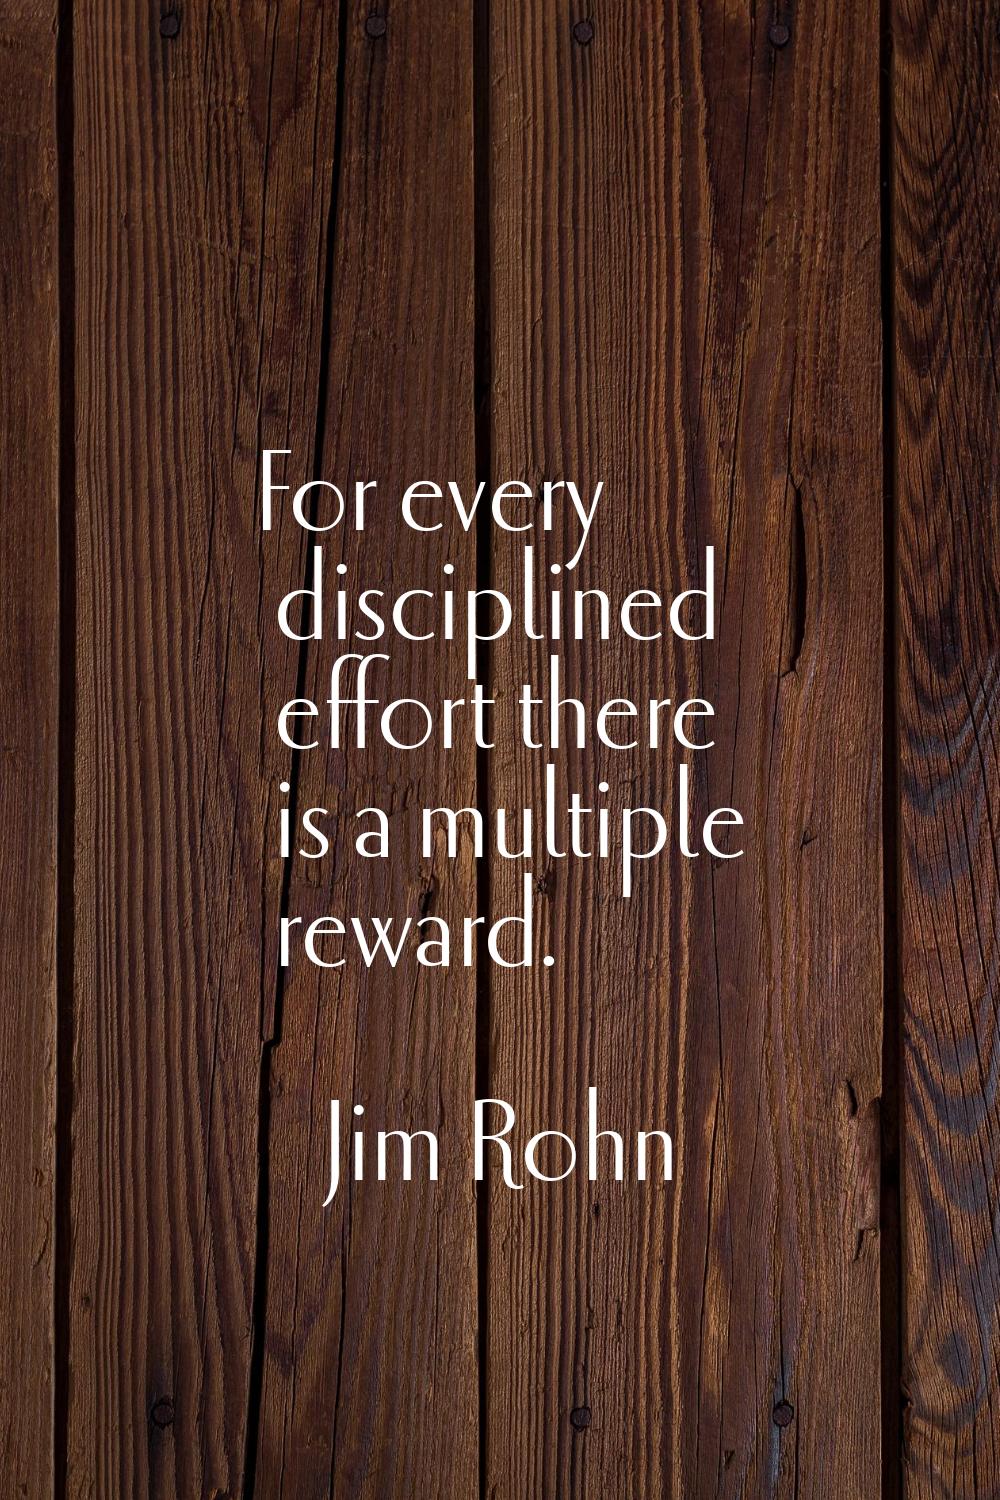 For every disciplined effort there is a multiple reward.